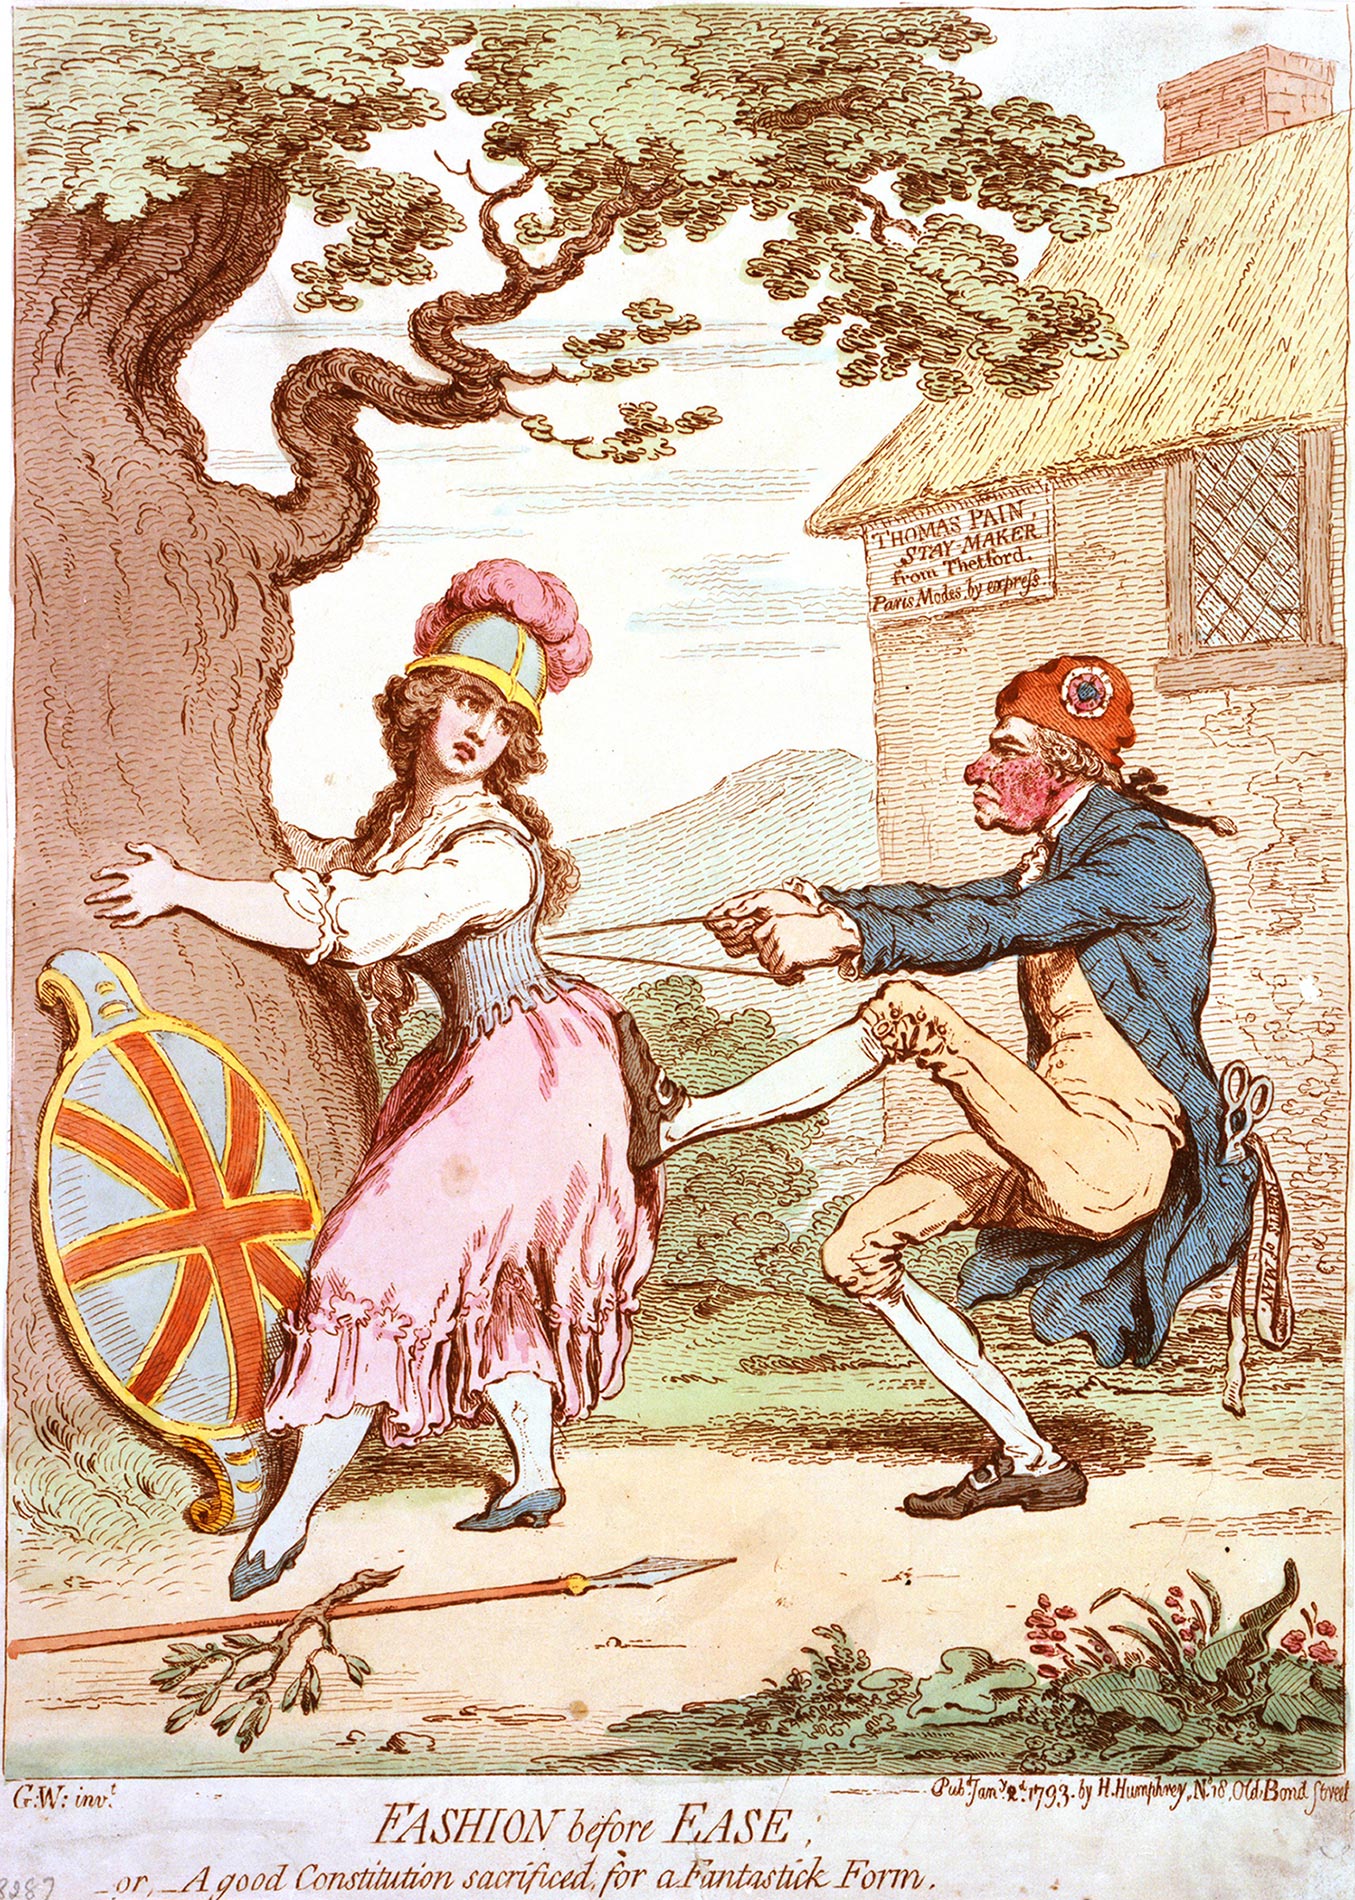 Illustration showing a man pulling the corset strings of a woman wearing a helmet like that typically worn by Britannia. The woman is holding on to an oak tree and Britannia’s shield is propped against the tree. On the ground lies Britannia’s spear. In the background, we see a house with a sign reading ‘Thomas Pain, Stay-maker from Thetford. Paris Modes by express’. The illustration is captioned ‘FASHION before EASE, or, A good Constitution sacrificed, for a Fantastick Form’.